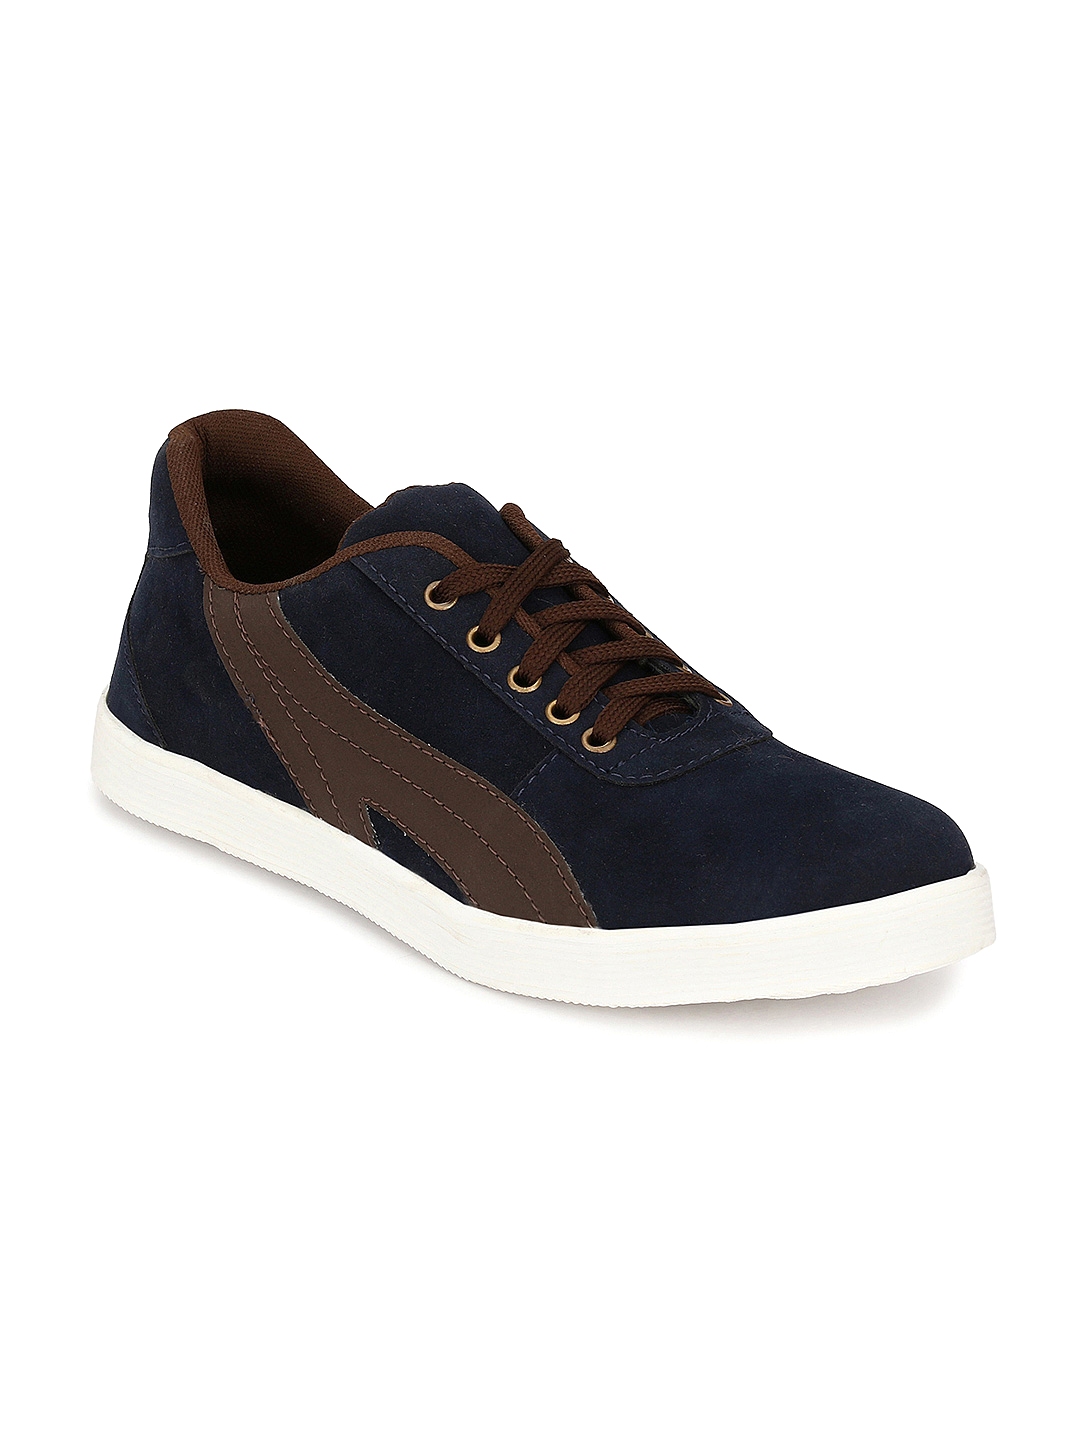 mactree casual shoes, OFF 78%,Best 